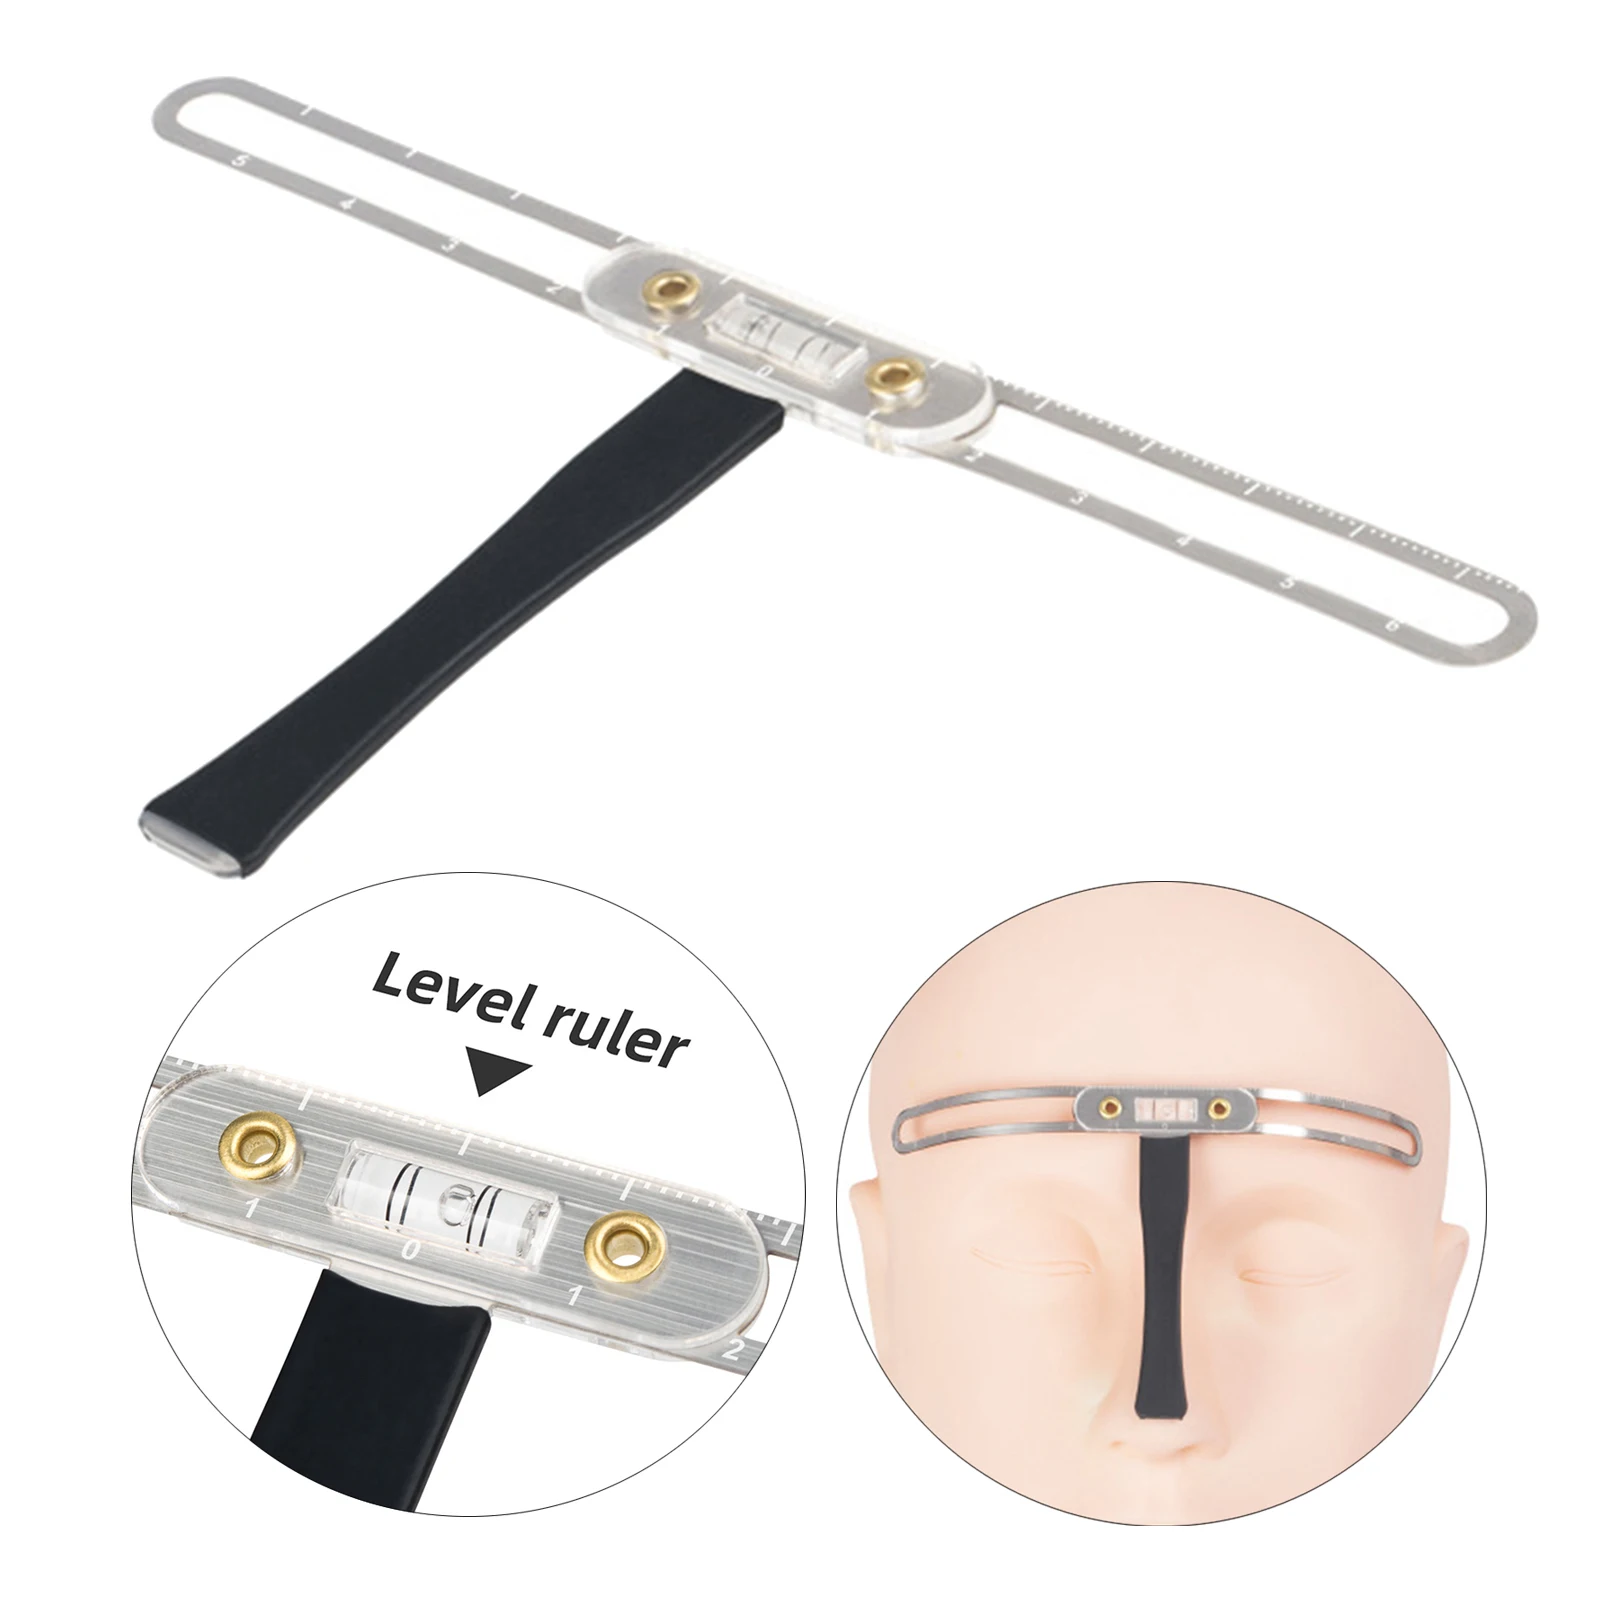 Classic Eyebrow Stencil Positioning Balance Ruler Guide Measuring Tool Grooming Stencil Shaper Tattoo Eyebrow Measuring